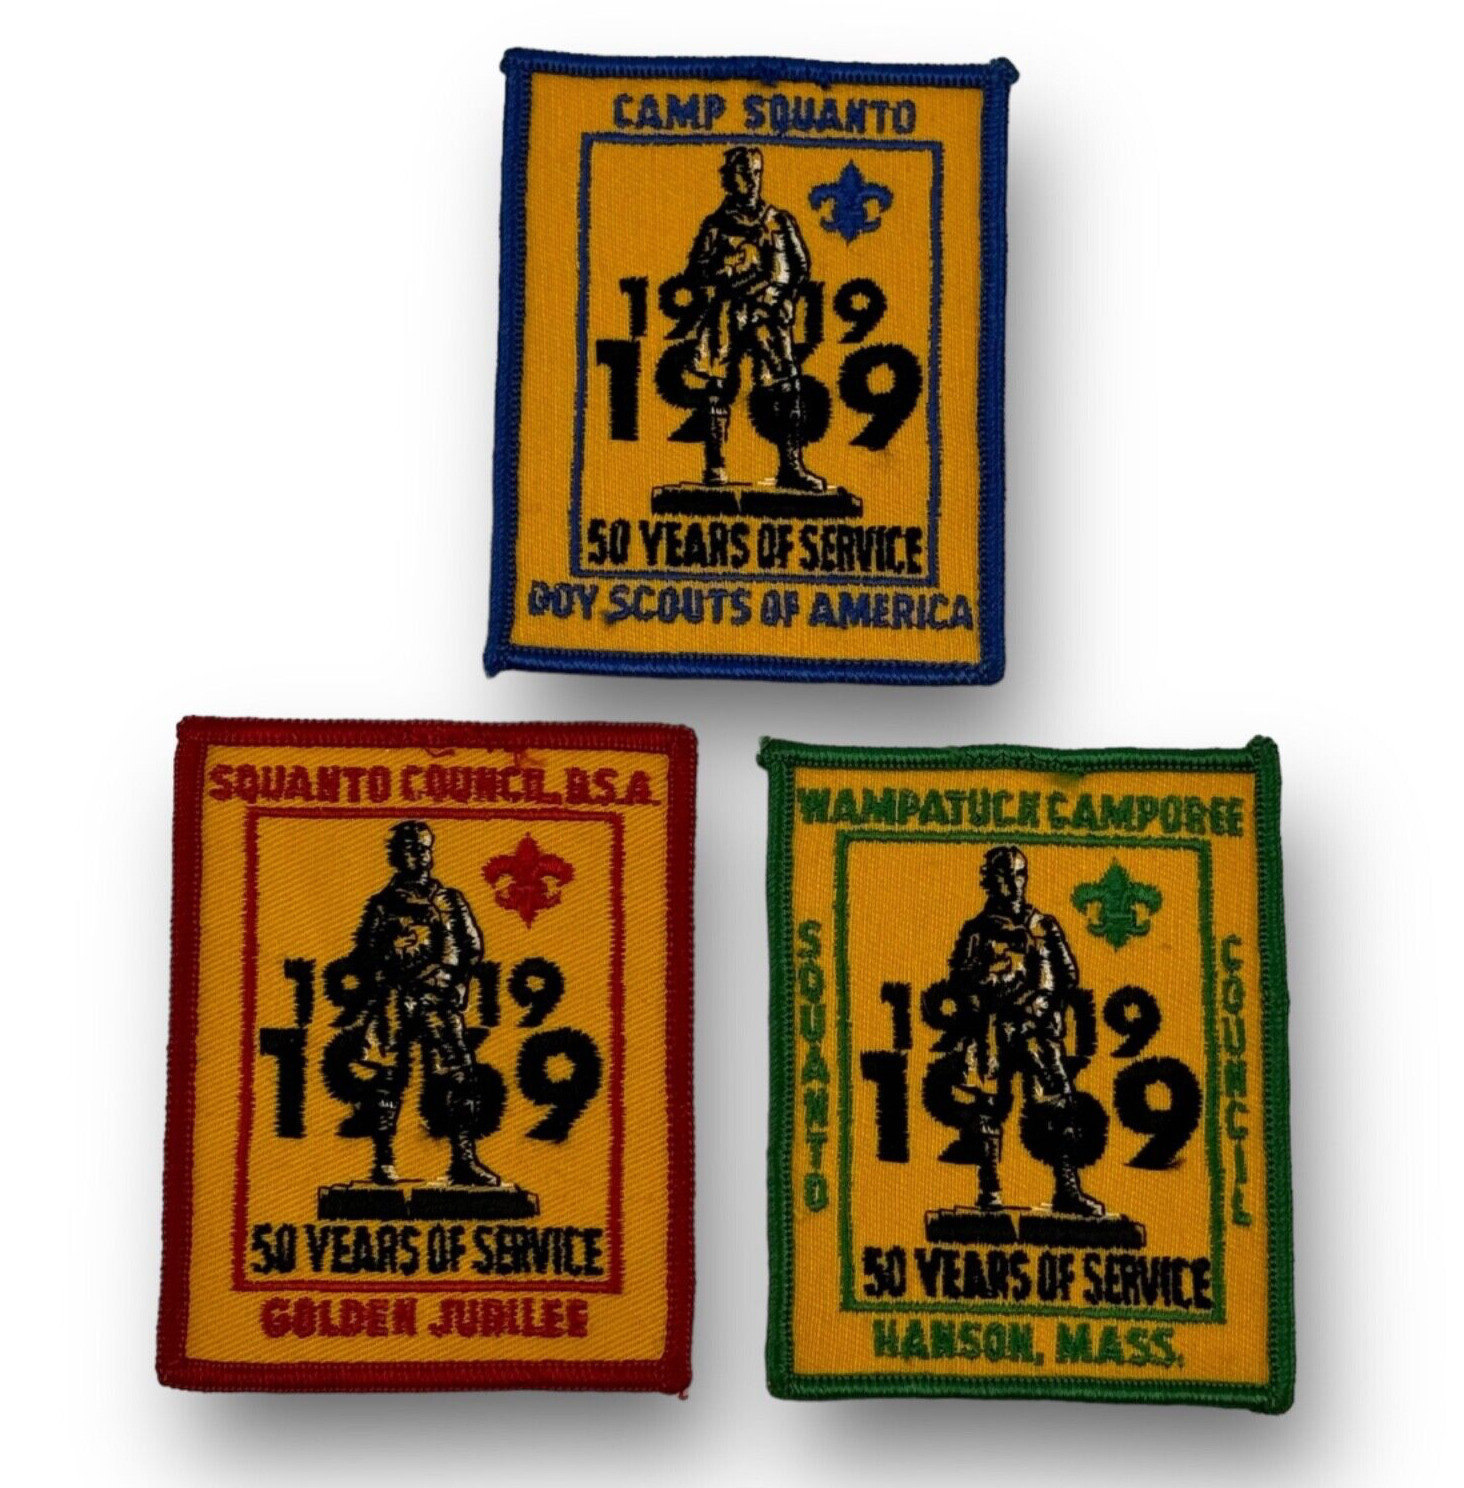 3 BSA Boy Scouts Squanto Camp/Council 1919-1969 50 Years of Service Patches